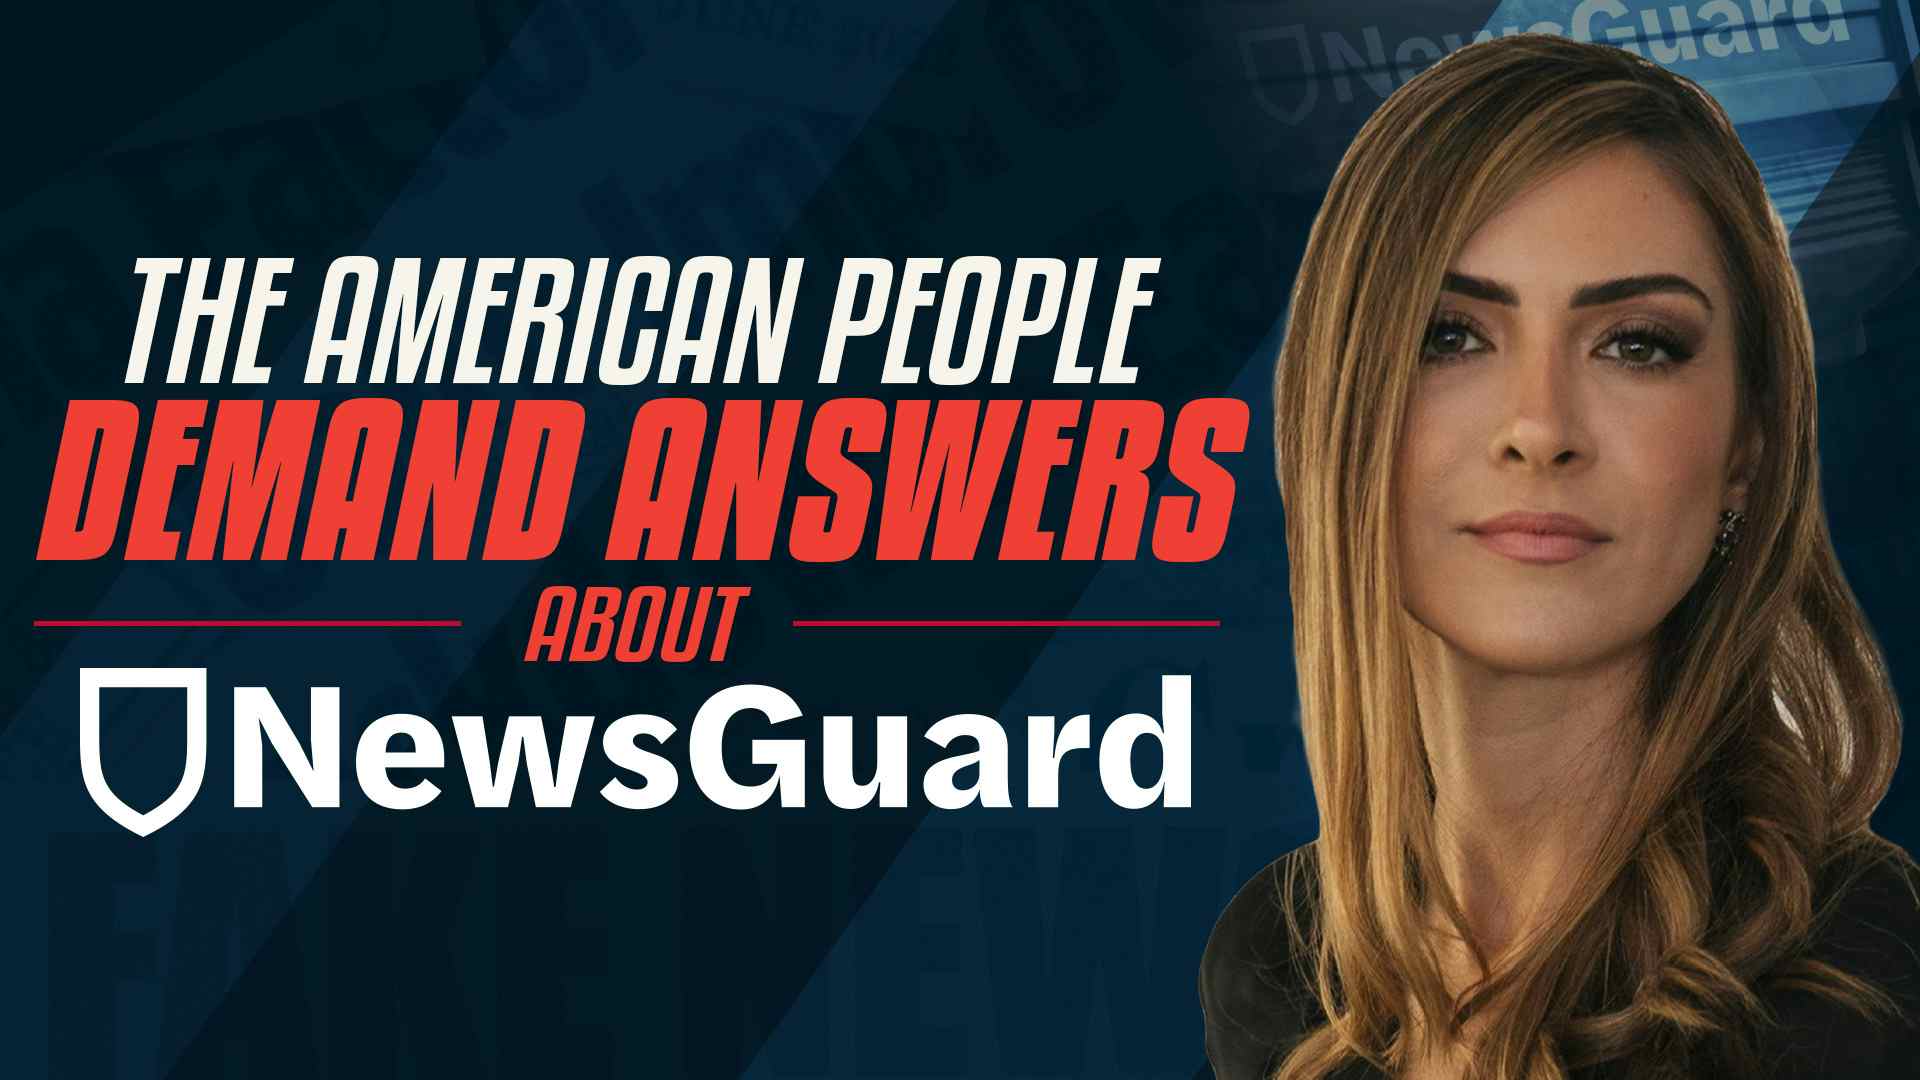 The American People Demand Answers about NewsGuard